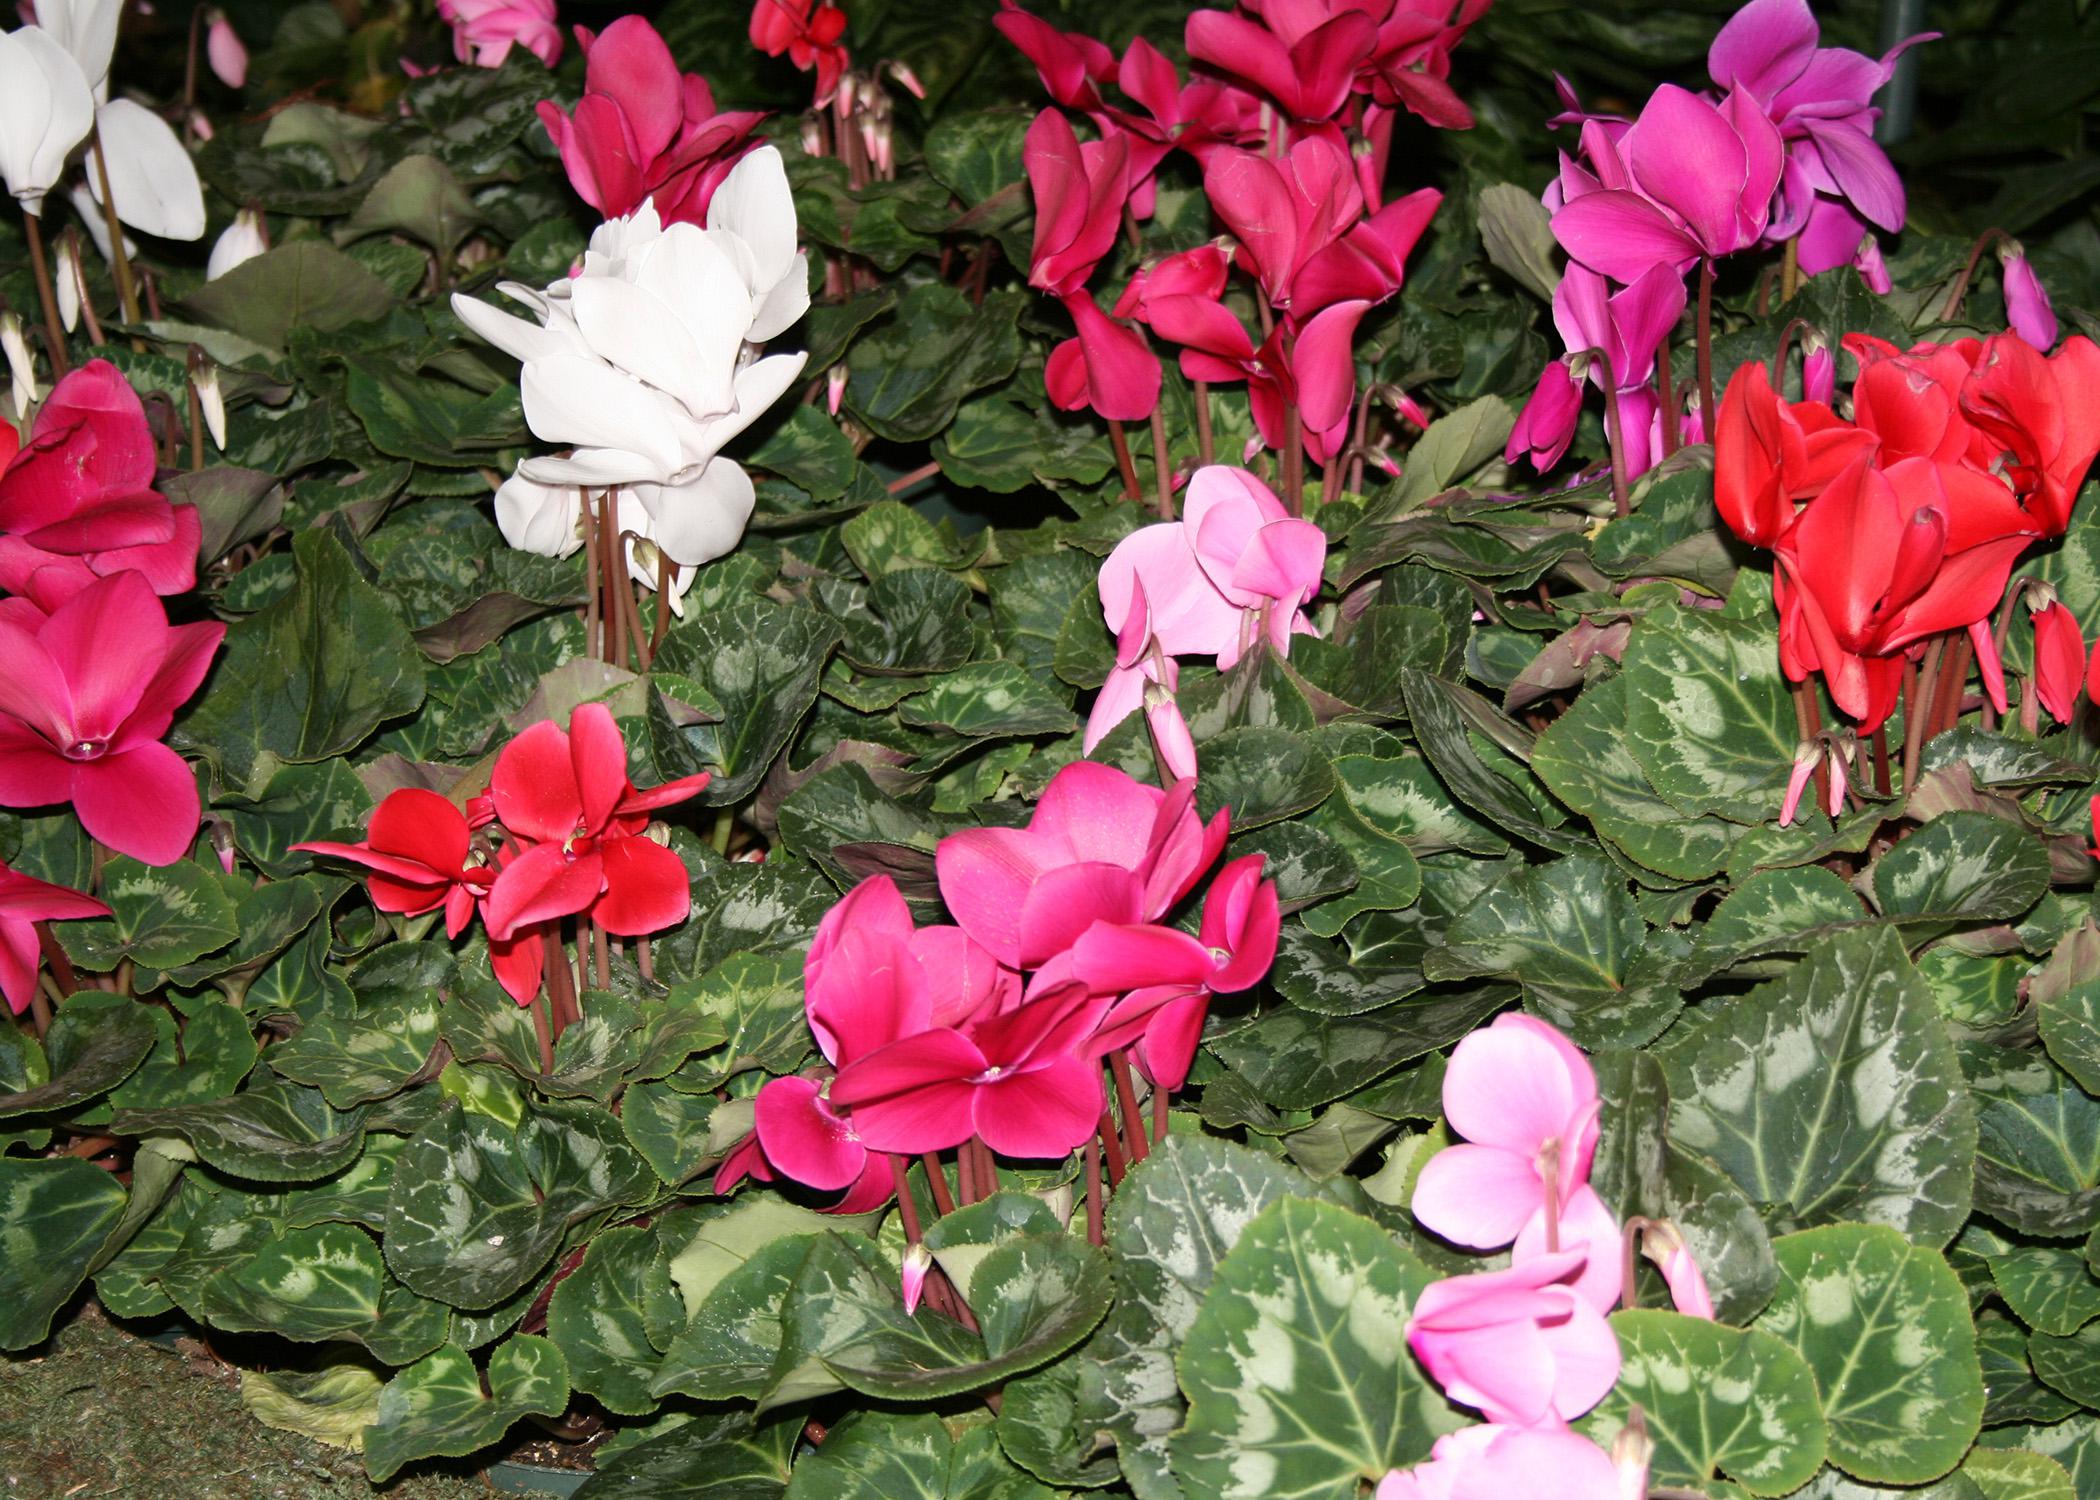 Cyclamen is a great indoor plant for the Christmas holidays because it has a long blooming period that produces loads of colorful flowers. (Photo by MSU Extension Service/Gary Bachman)